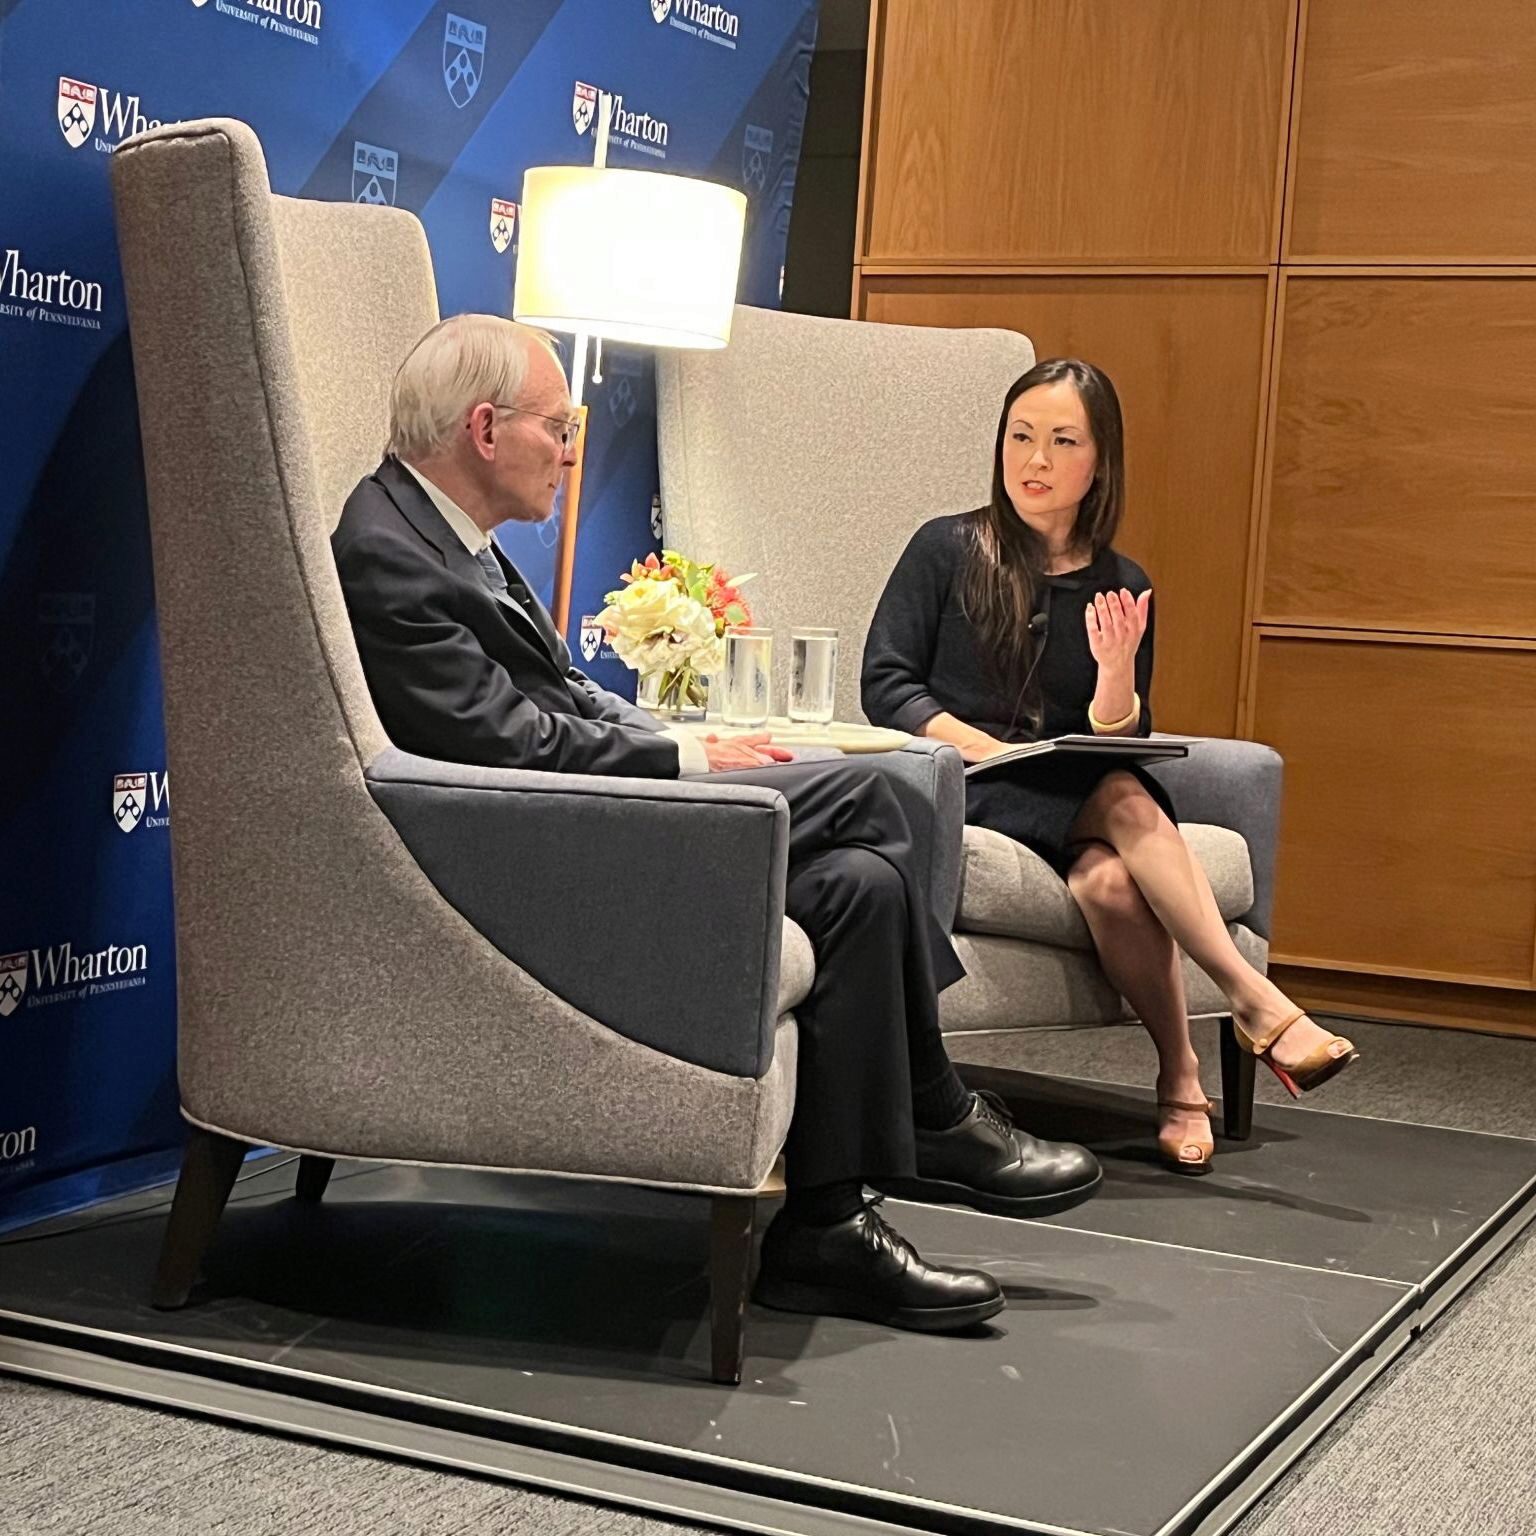 A keynote fireside chat with H. Rodgin "Rodge" Cohen, Senior Chair of Sullivan & Cromwell LLP, led by Professor Sarah Hammer, Future of Finance Chair and Executive Director